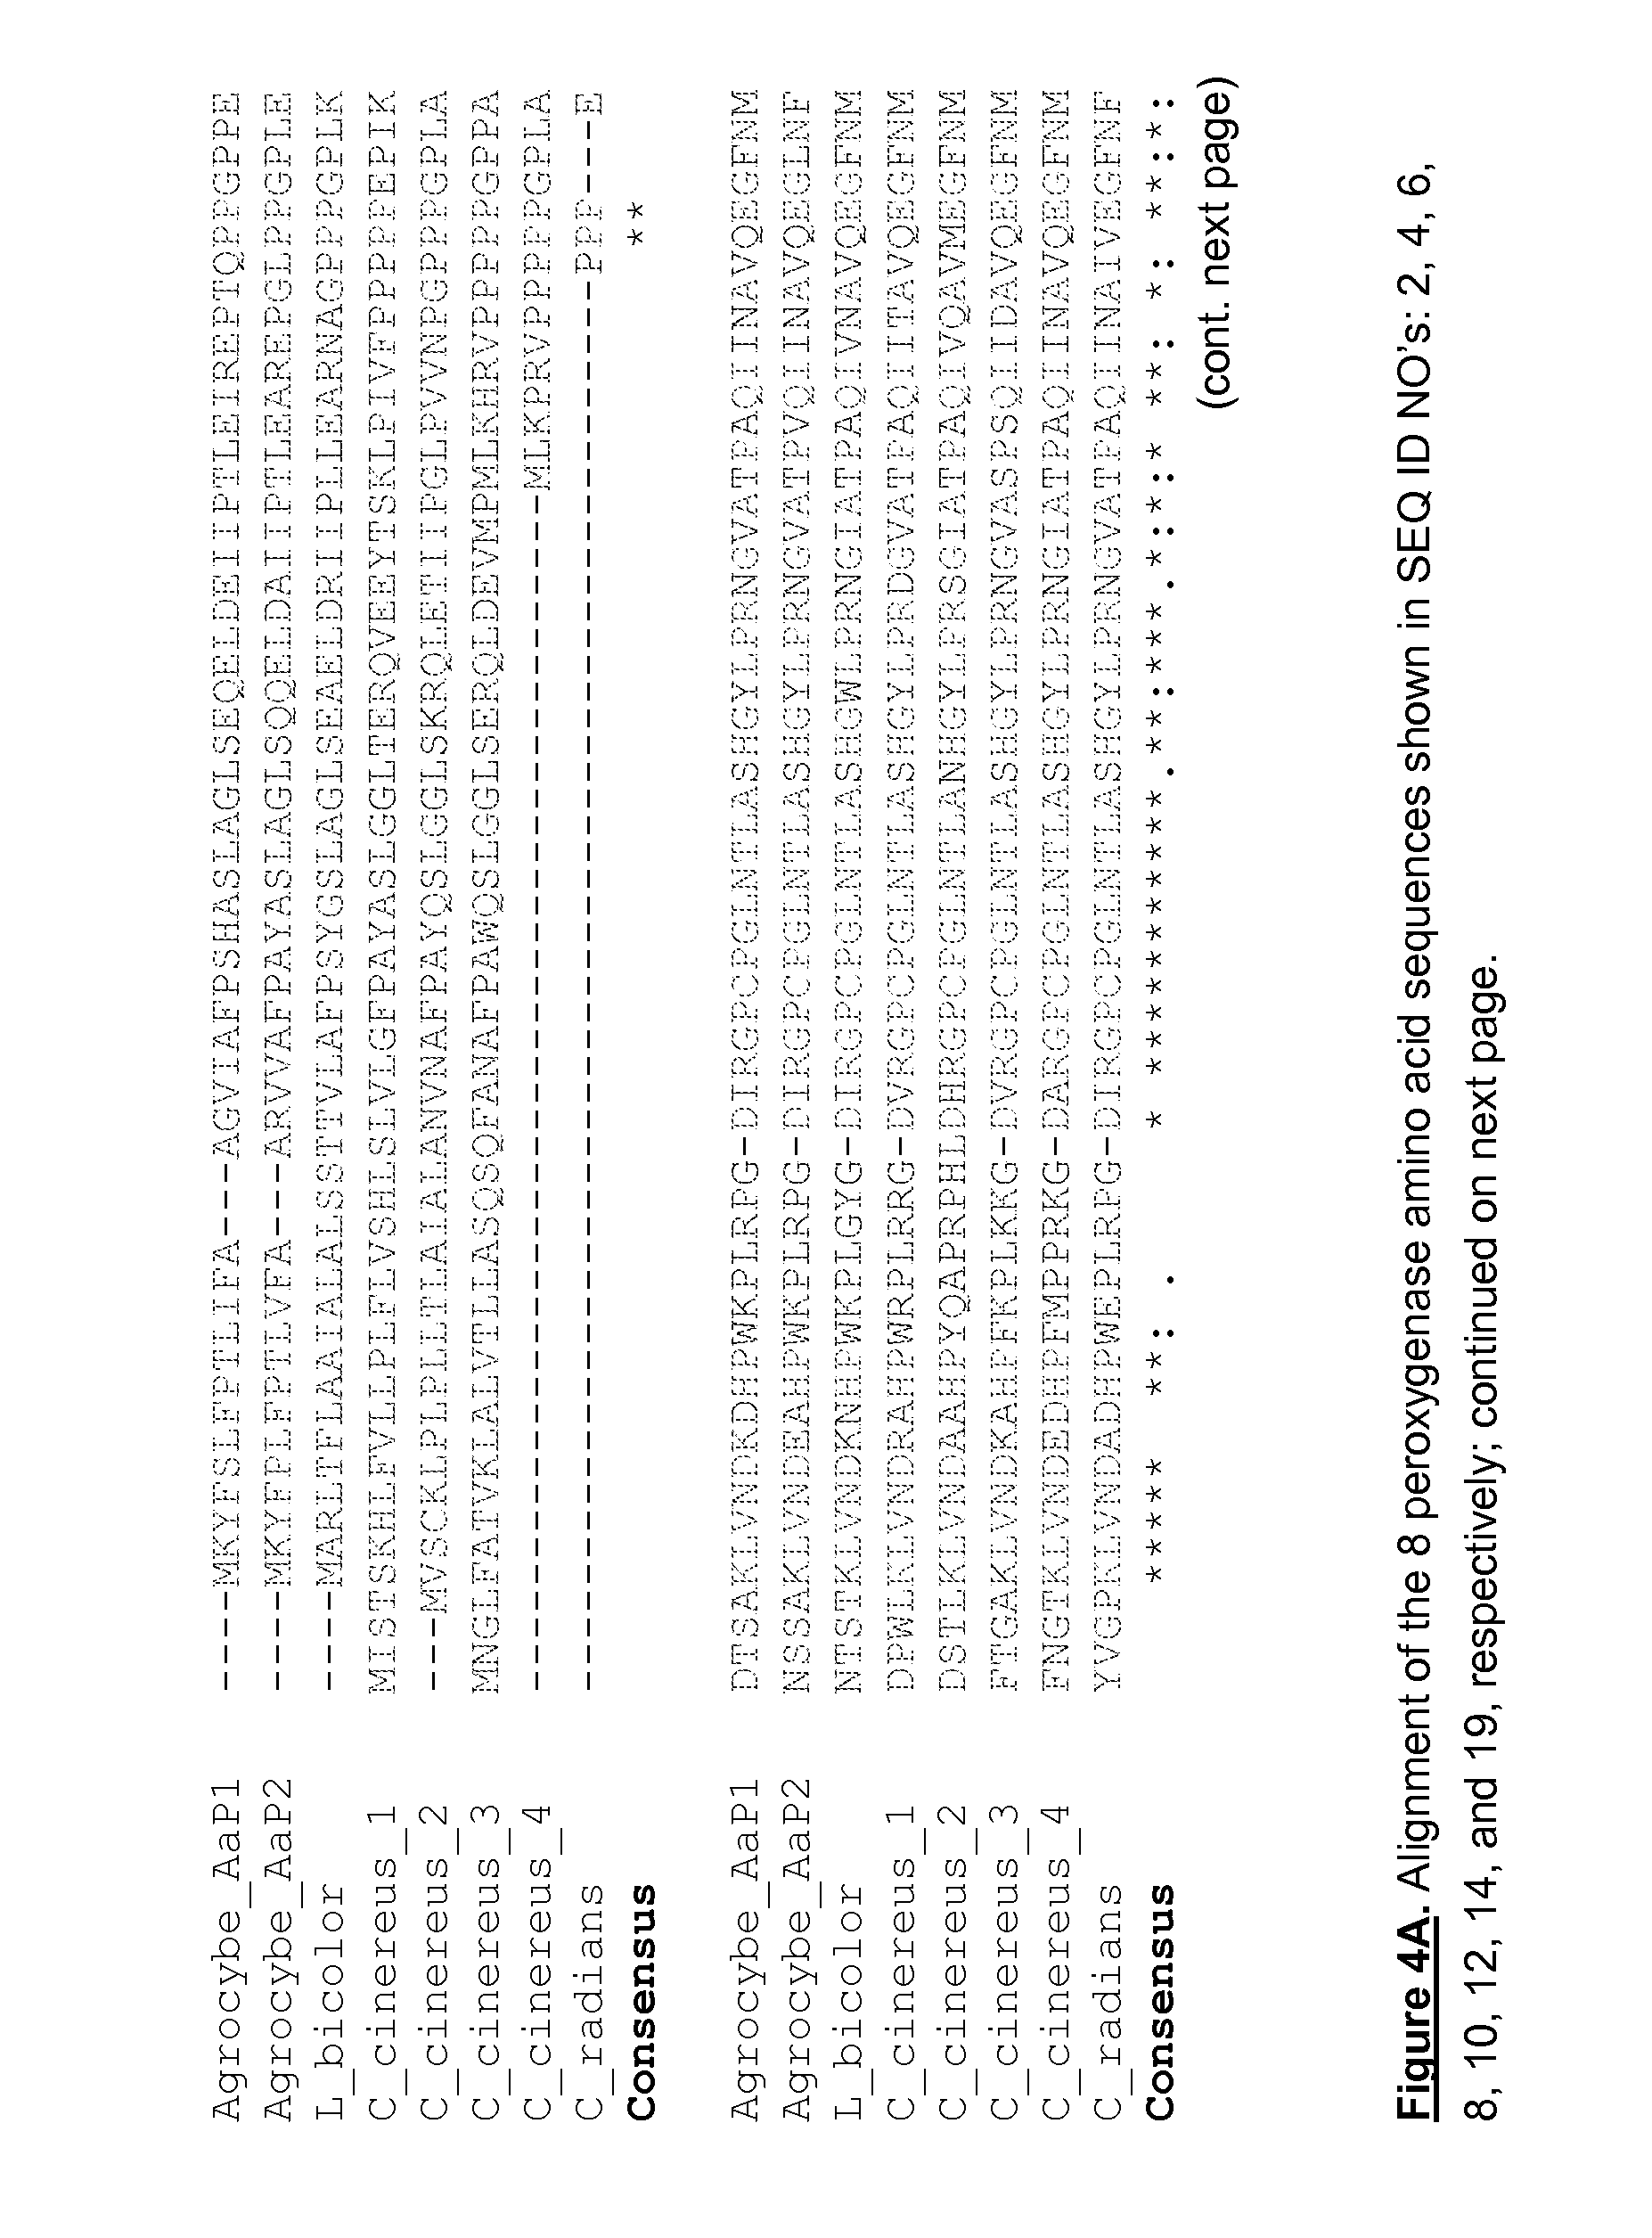 Fungal Peroxygenases and Methods of Application